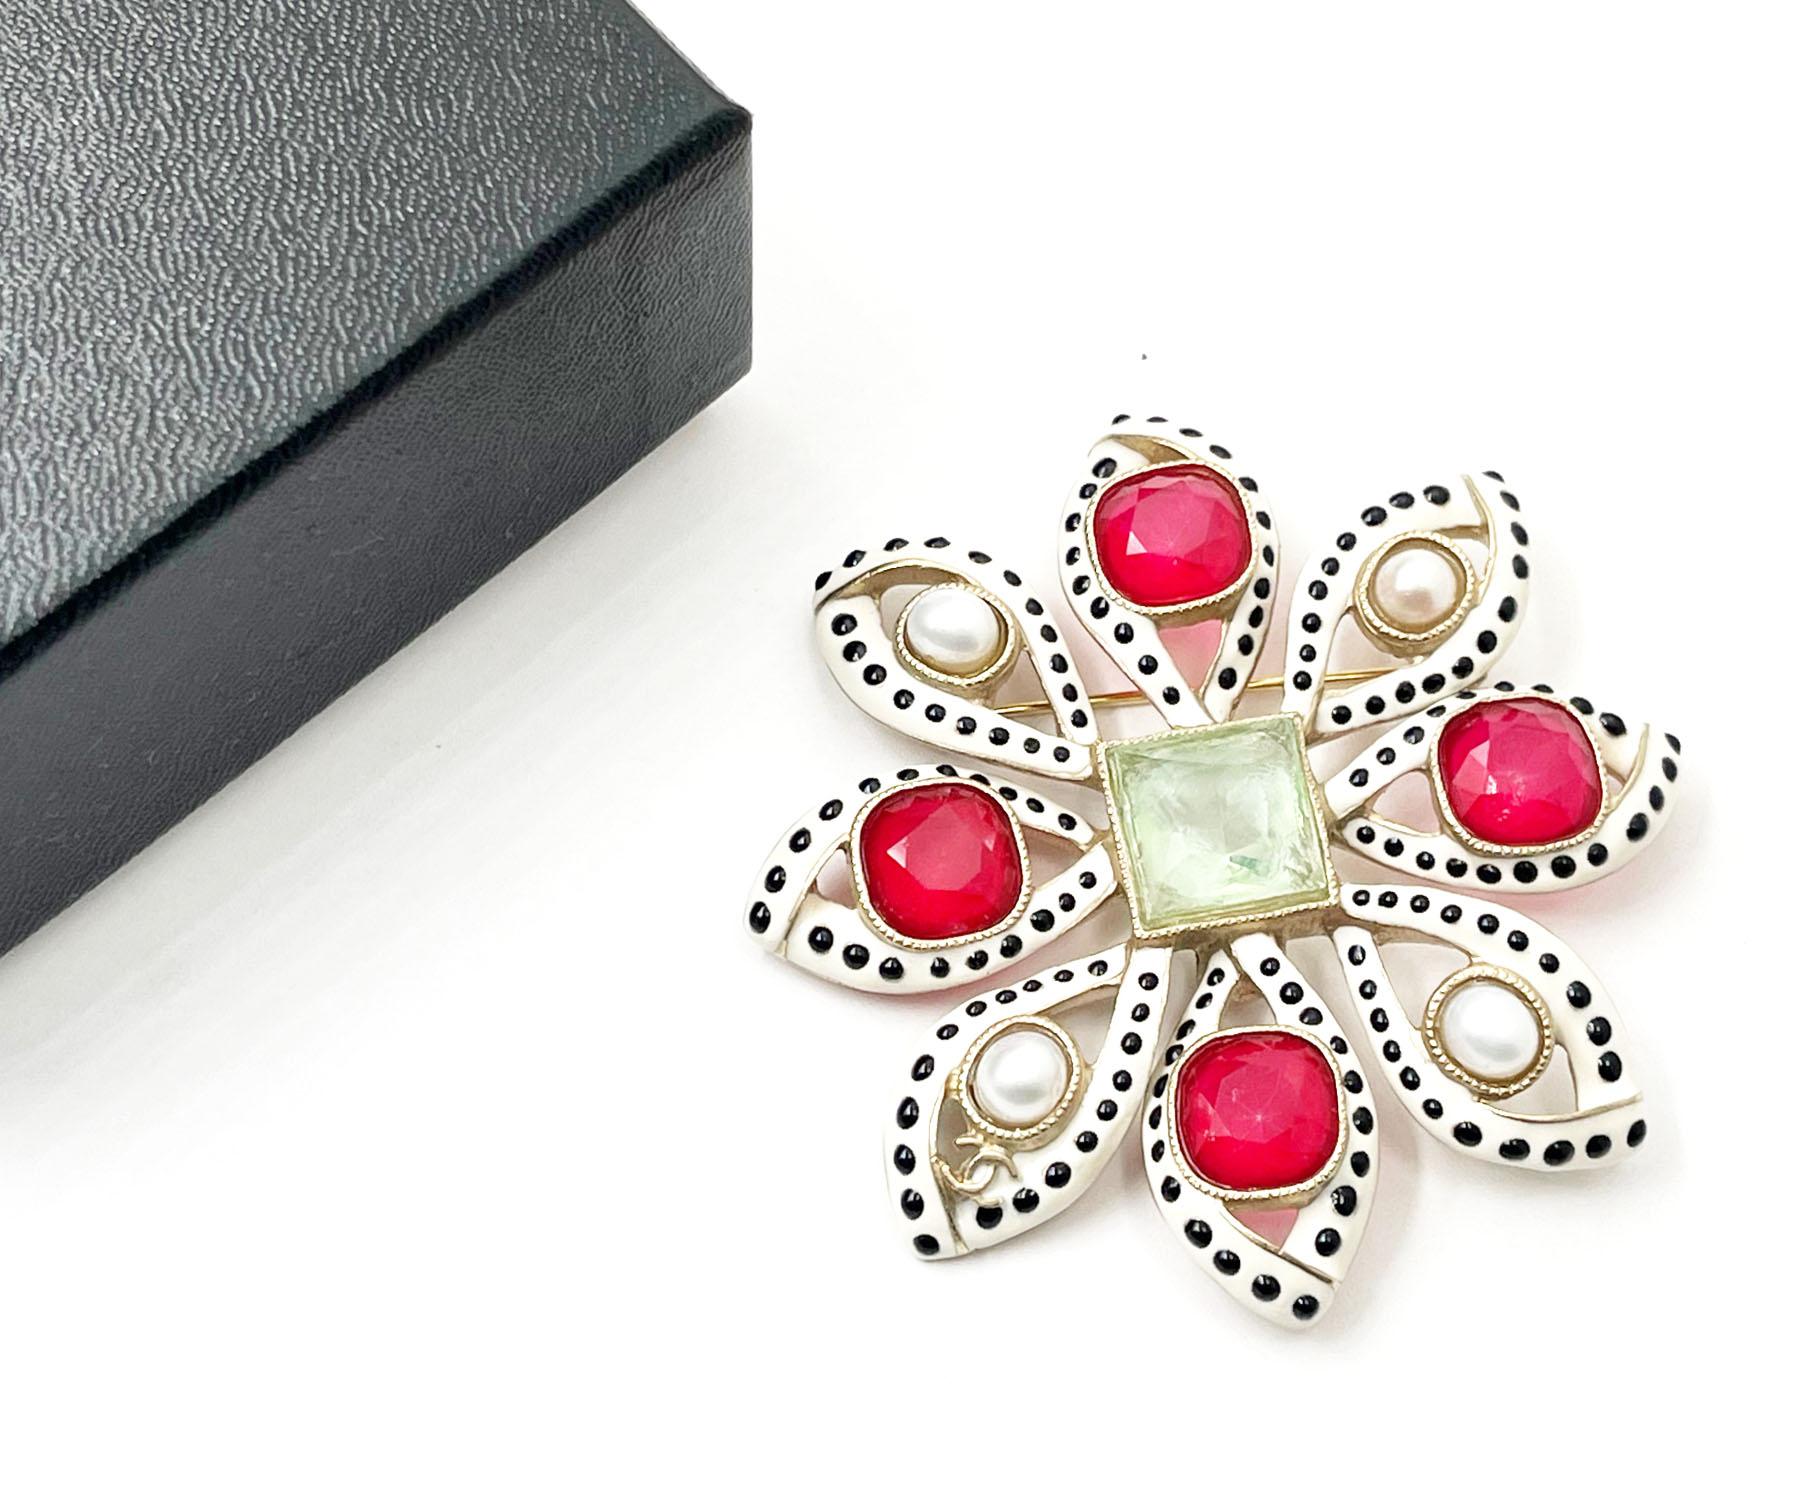 Chanel Rare White Black Polka Dot Red Gem Pearl Large Brooch

*Marked 16
*Made in France
*Comes with the original box

- It is approximately 2.75' x2.75